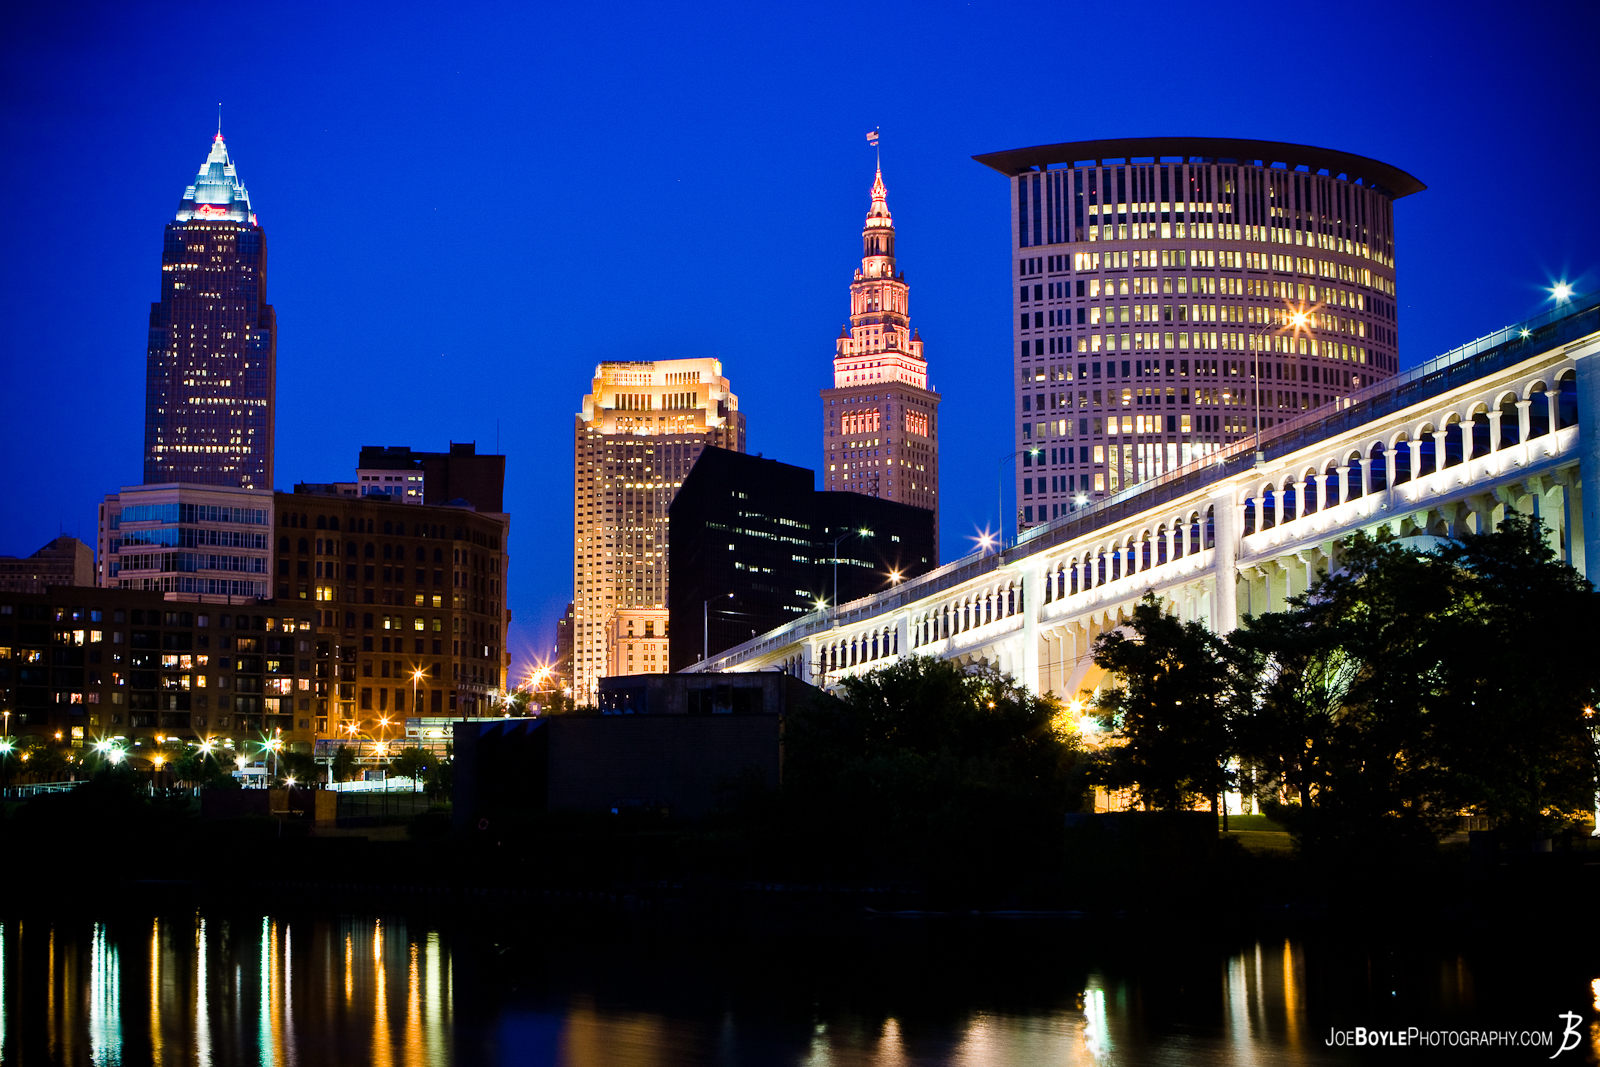  This photo is of the Cleveland Skyline with the Veterans Memorial Bridge and Cuyahoga River in the foreground. From left to right the 4 tallest buildings are: The Key Tower, The BP-Huntington Building, The Terminal Tower and the Justice Center. 